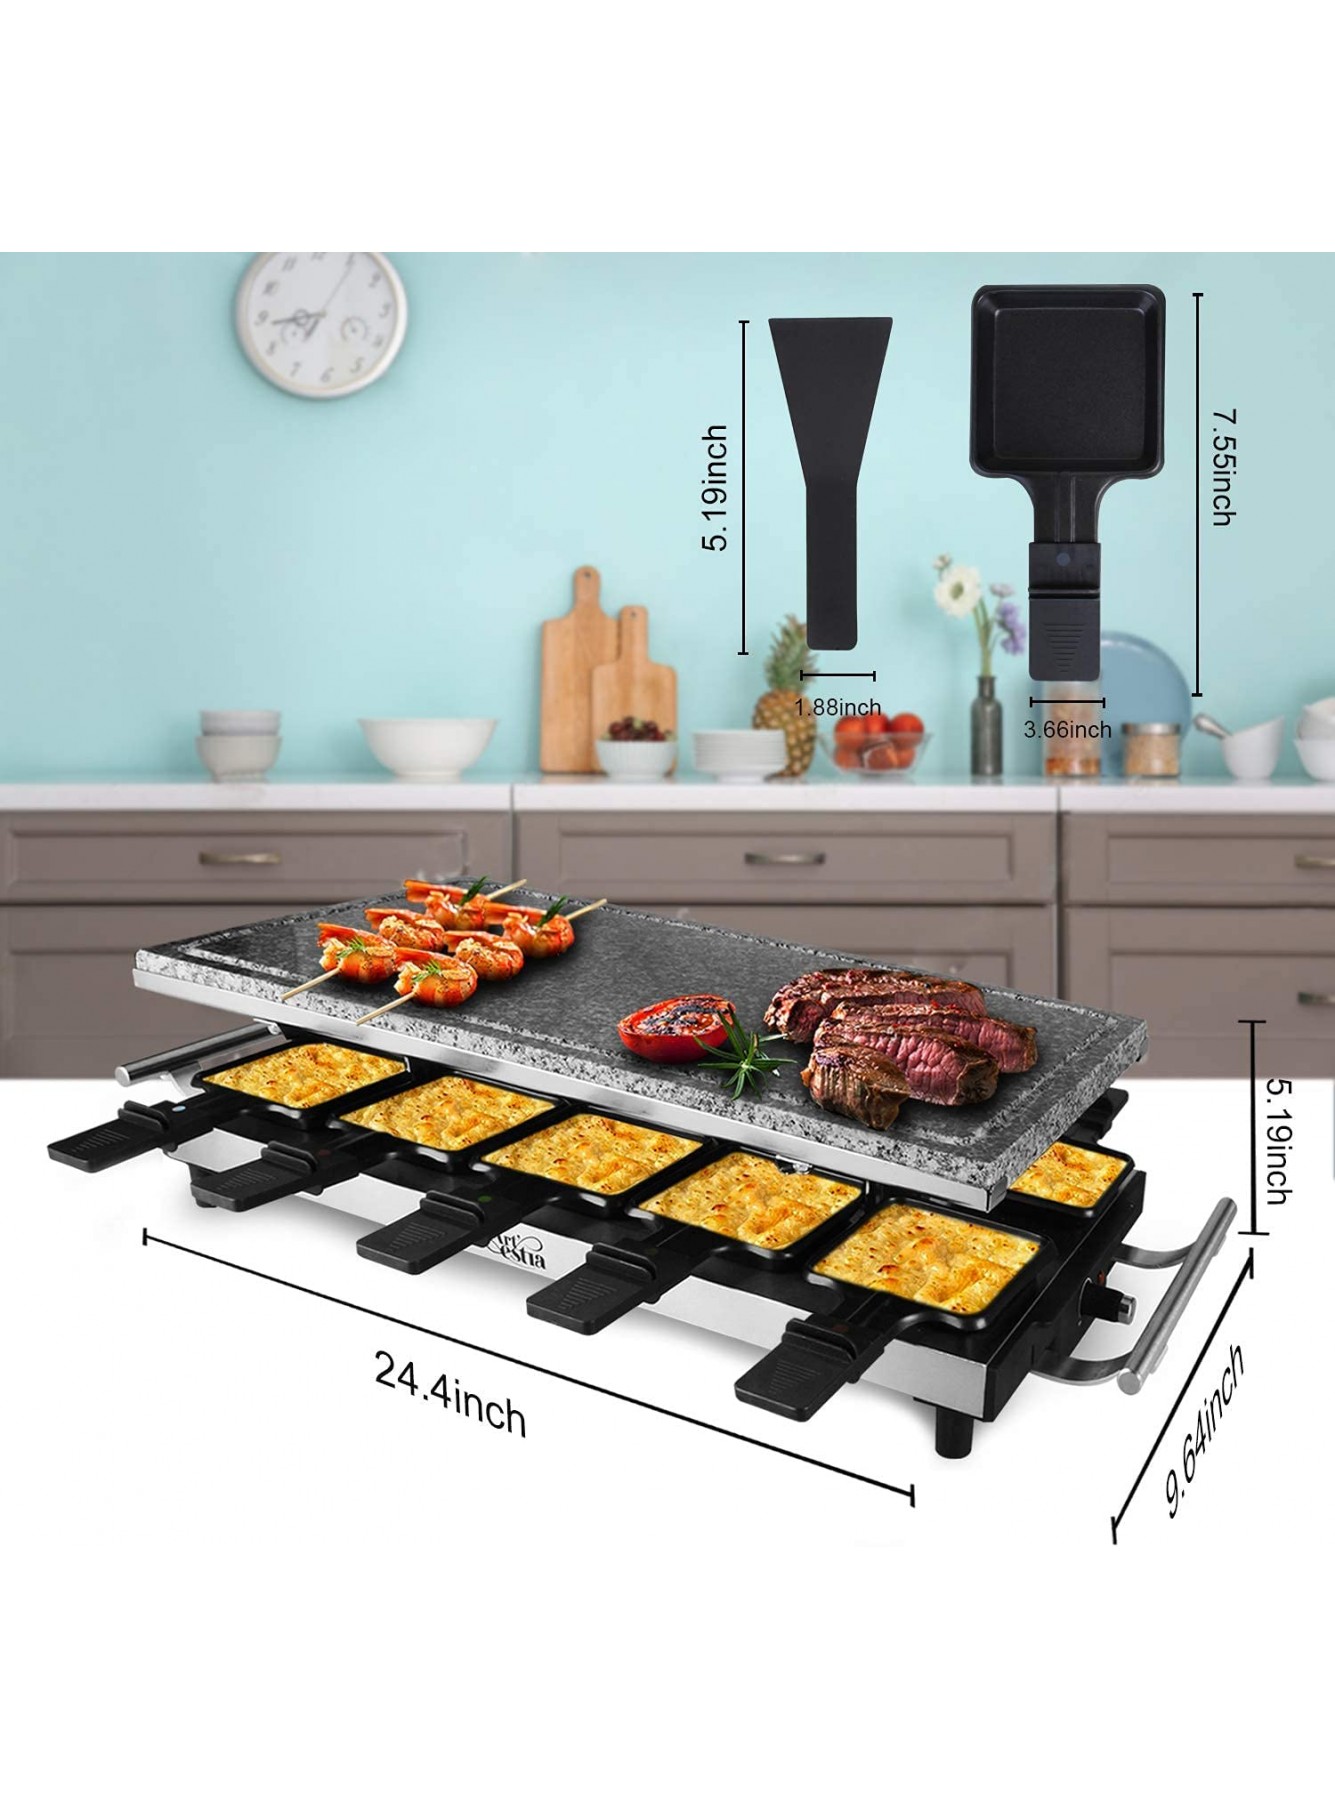 https://www.instagramscraperapi.com/image/cache/data/category_9/artestia-raclette-table-grill1500w-raclette-grill10-paddles-korean-bbq-grillchees--9913-1335x1800.jpg